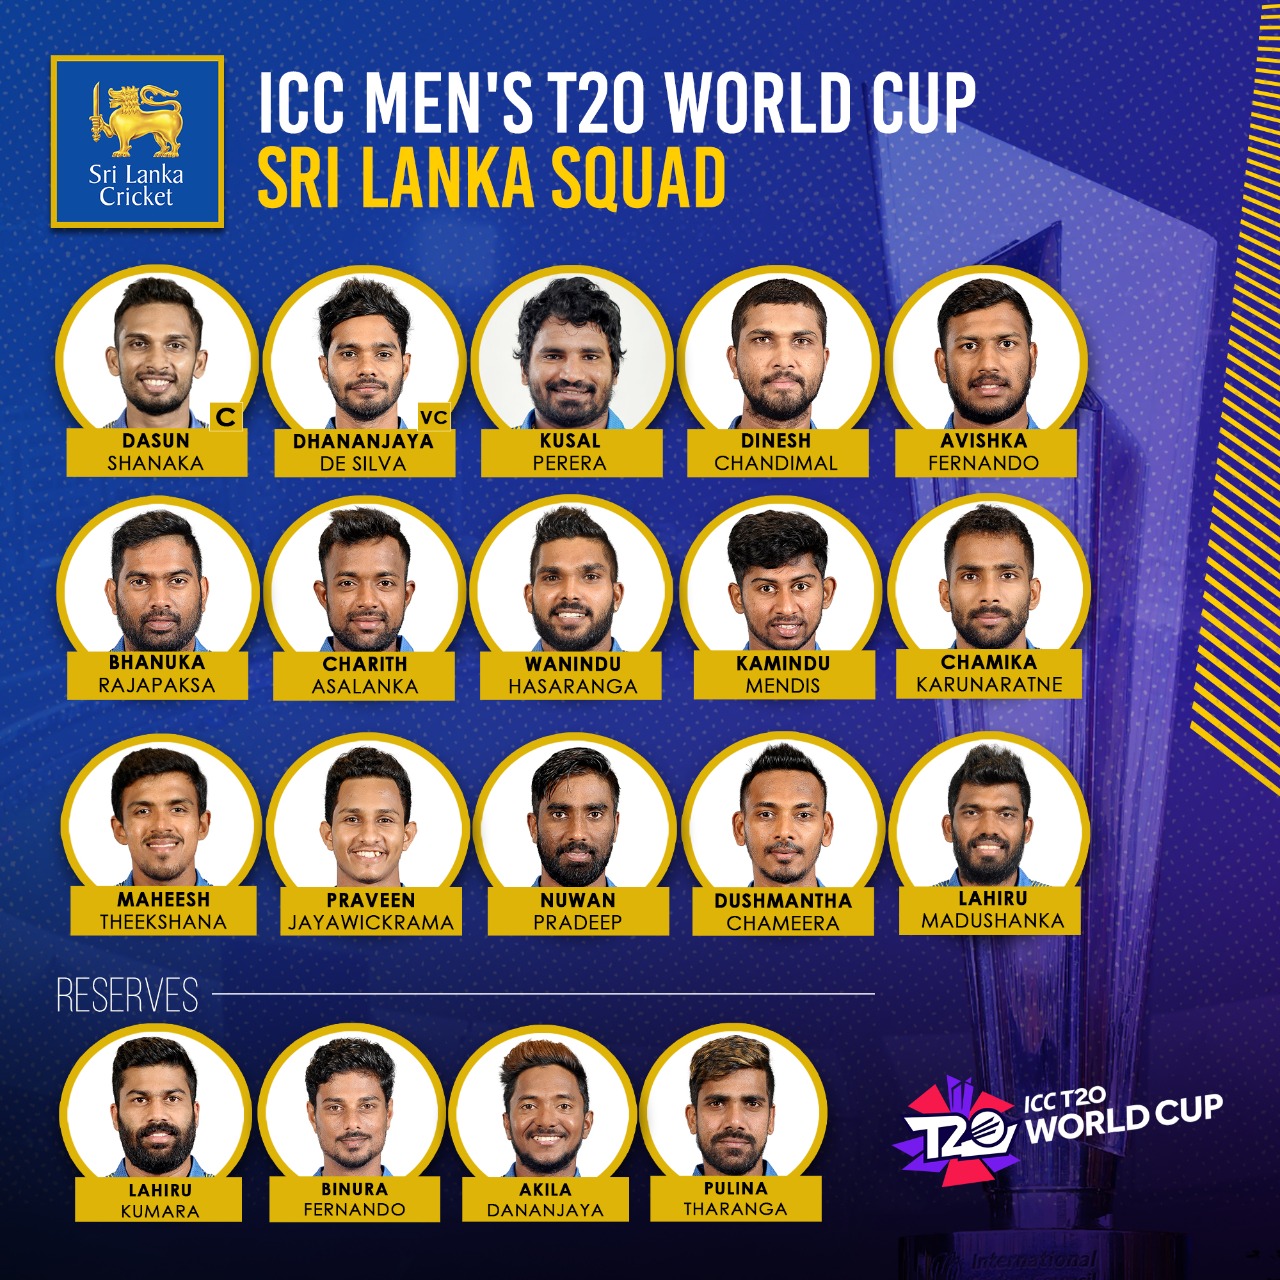 Sri Lanka squad for the ICC Men’s T20 World Cup 2021